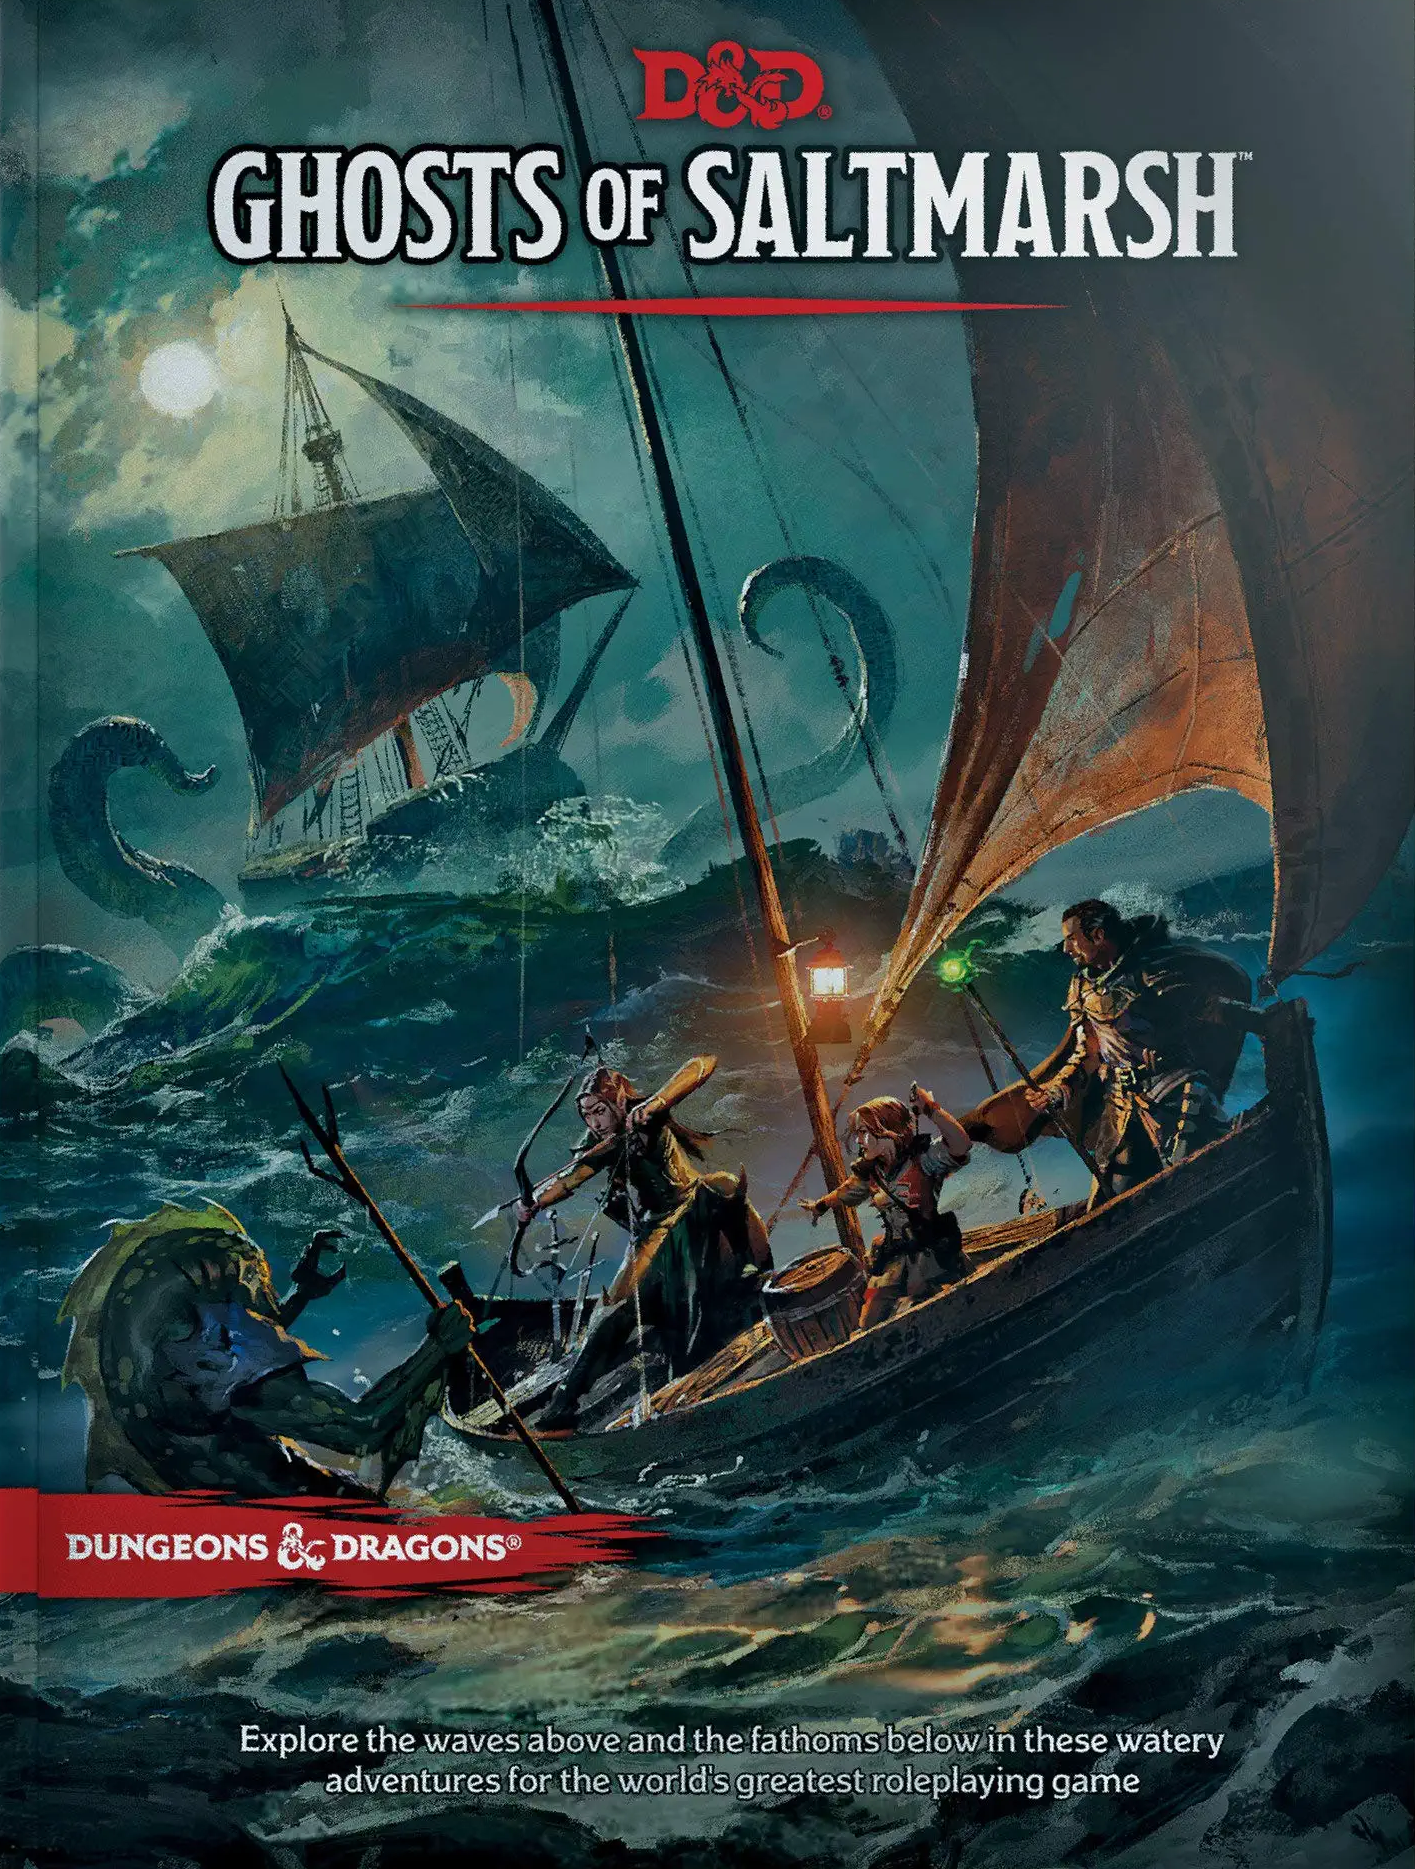 ghosts-of-saltmarsh-best-dungeons-and-dragons-book